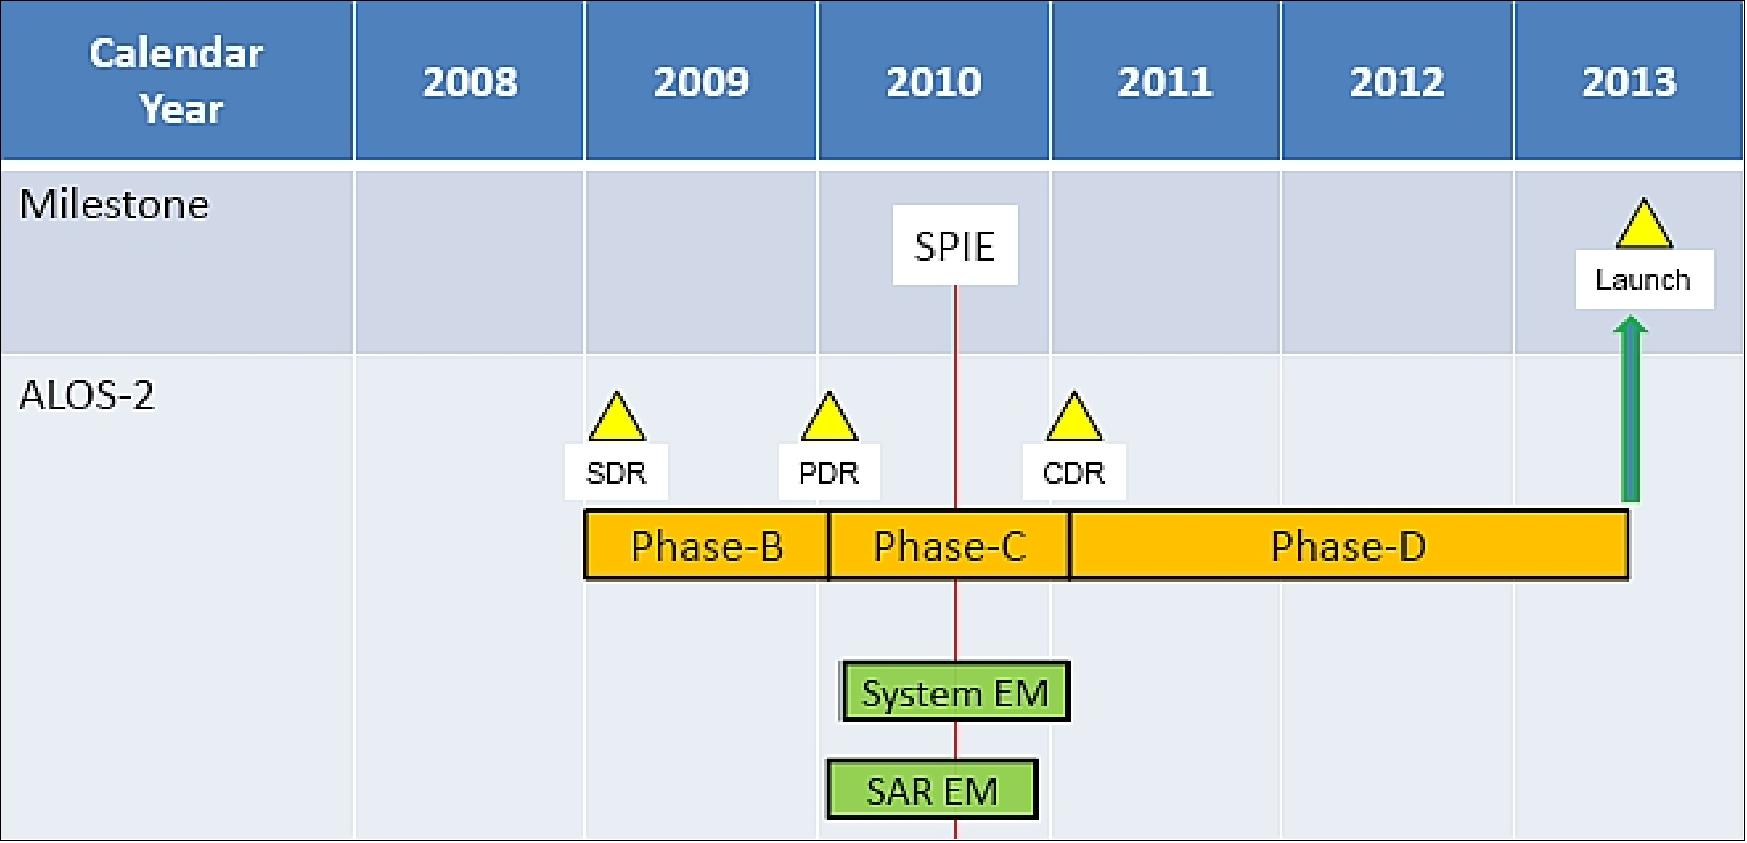 Figure 76: Overview of ALOS-2 implementation phases (image credit: JAXA, Ref. 4)